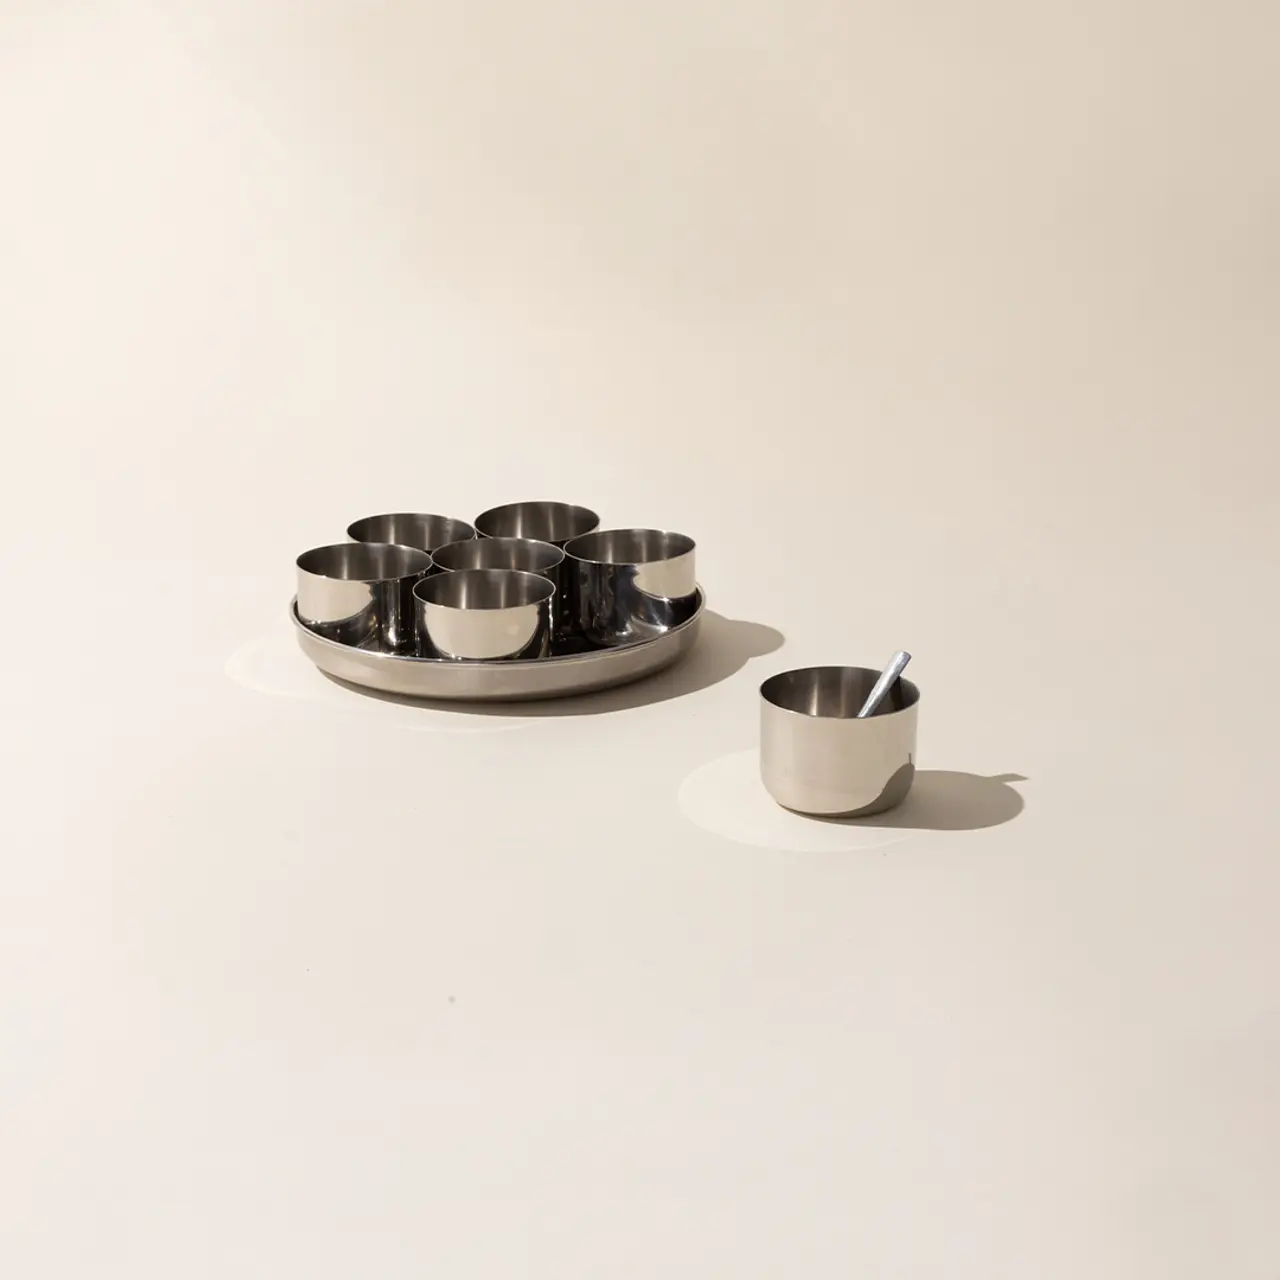 A set of stainless steel cups are neatly placed on a tray with one cup sitting isolated from the others on a plain background.